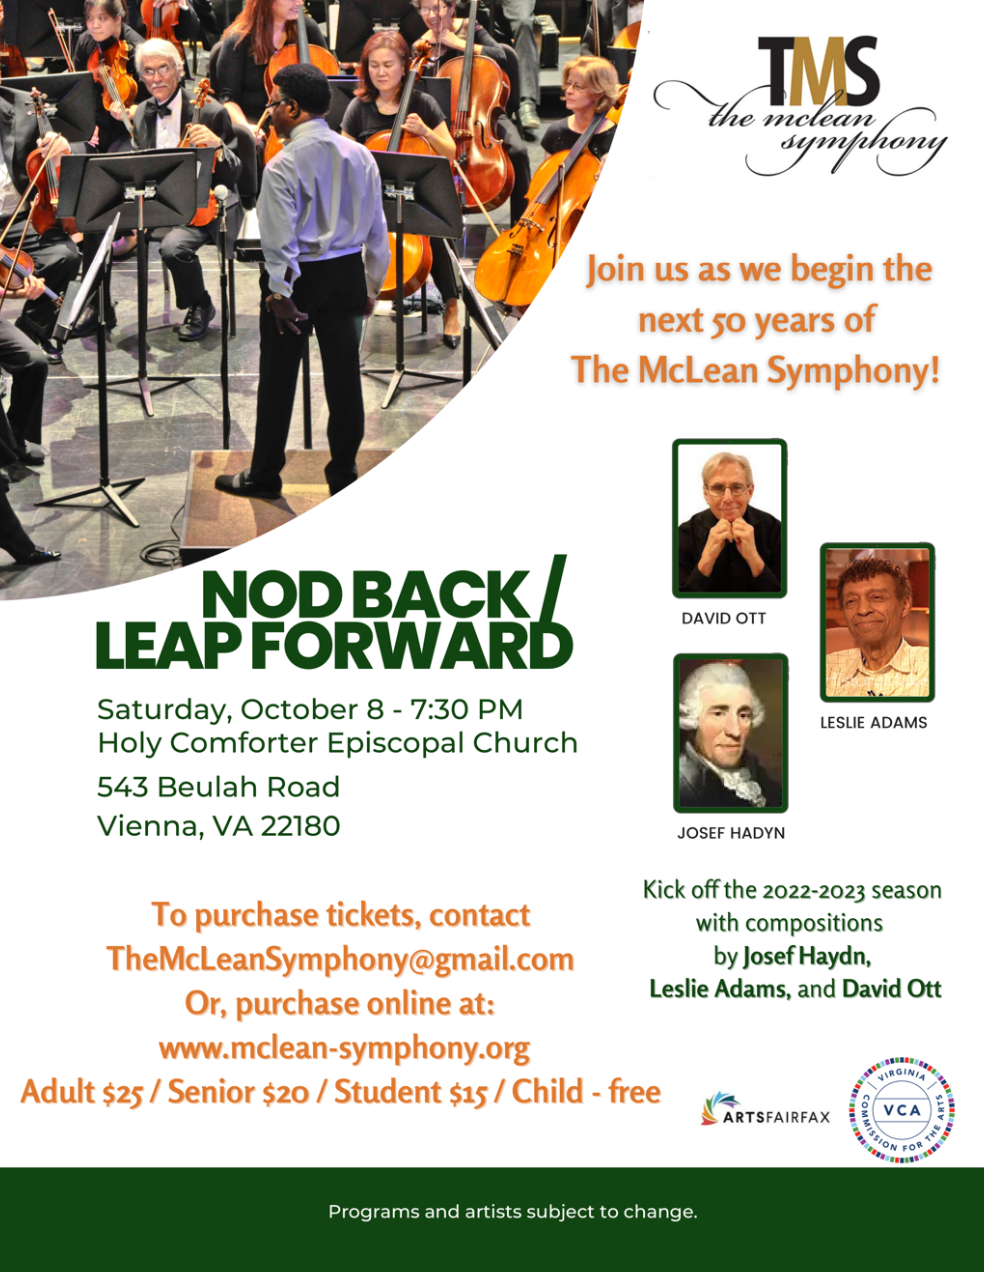 The McLean Symphony